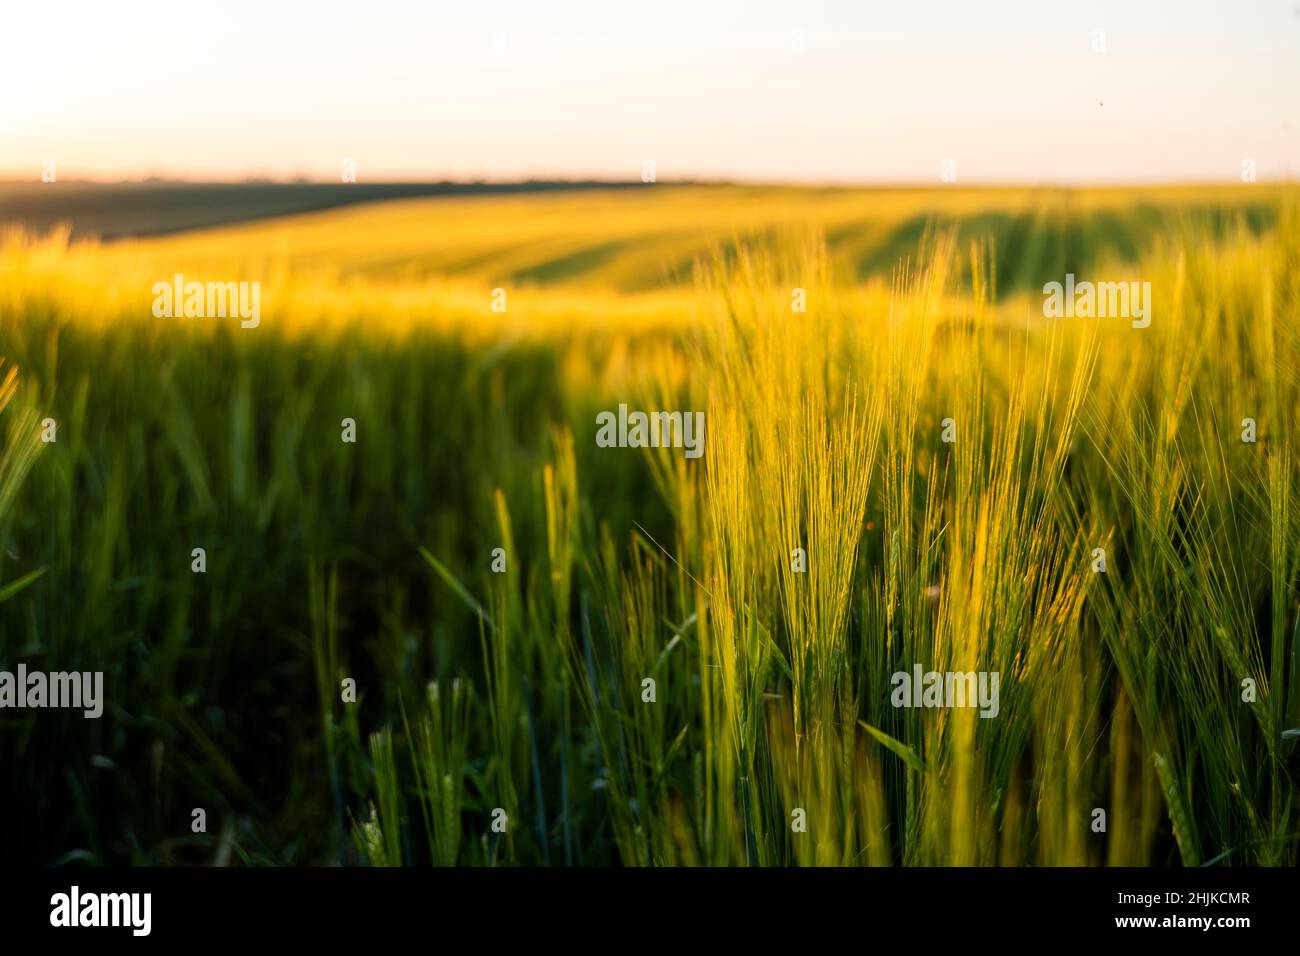 Green barley ears ripen against sunset sky in the early summer evening. Plants cultivating. Rural landscape of barley green field. Stock Photo